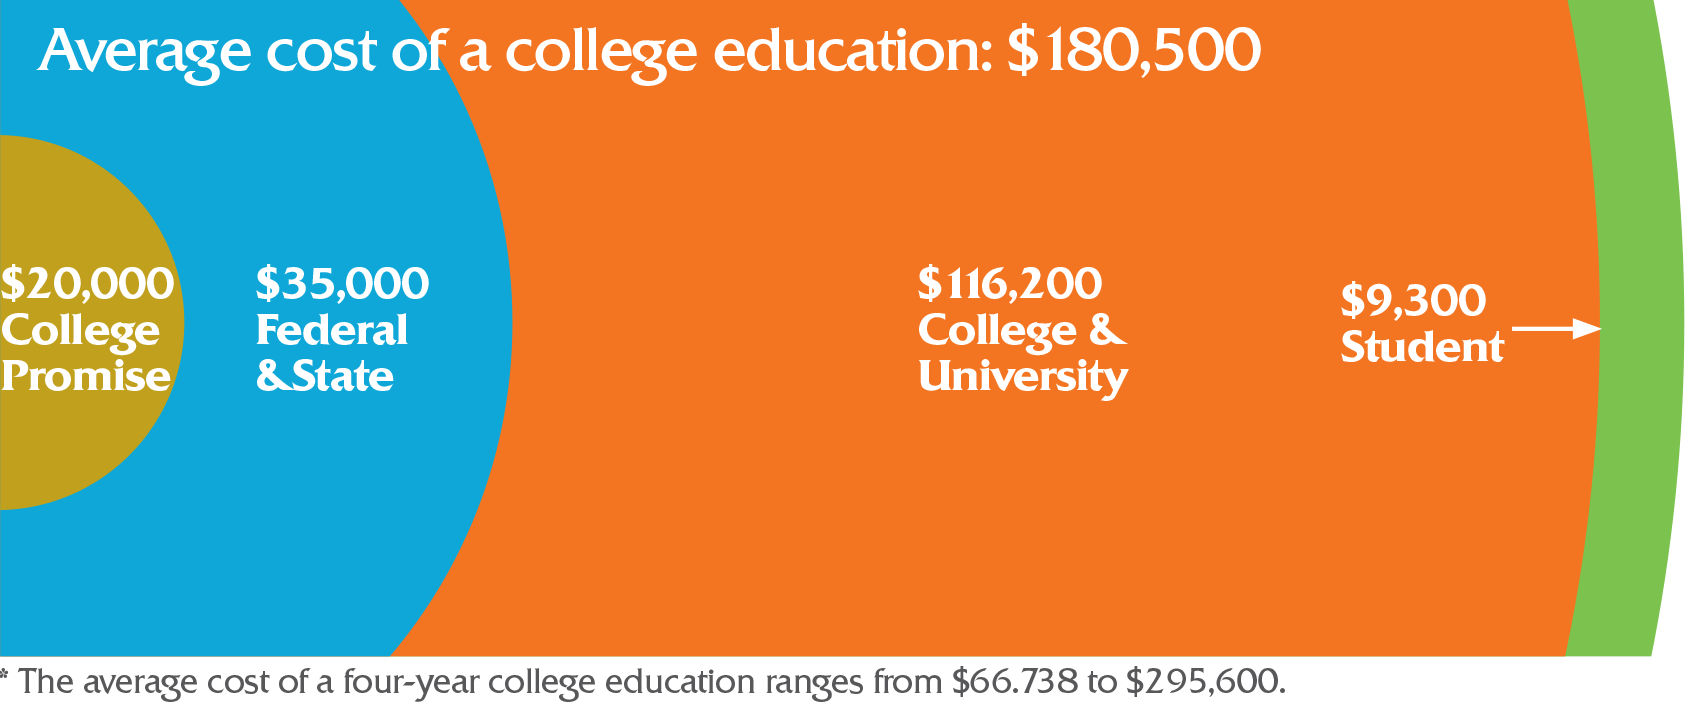 Average cost of a college education: $180,500.